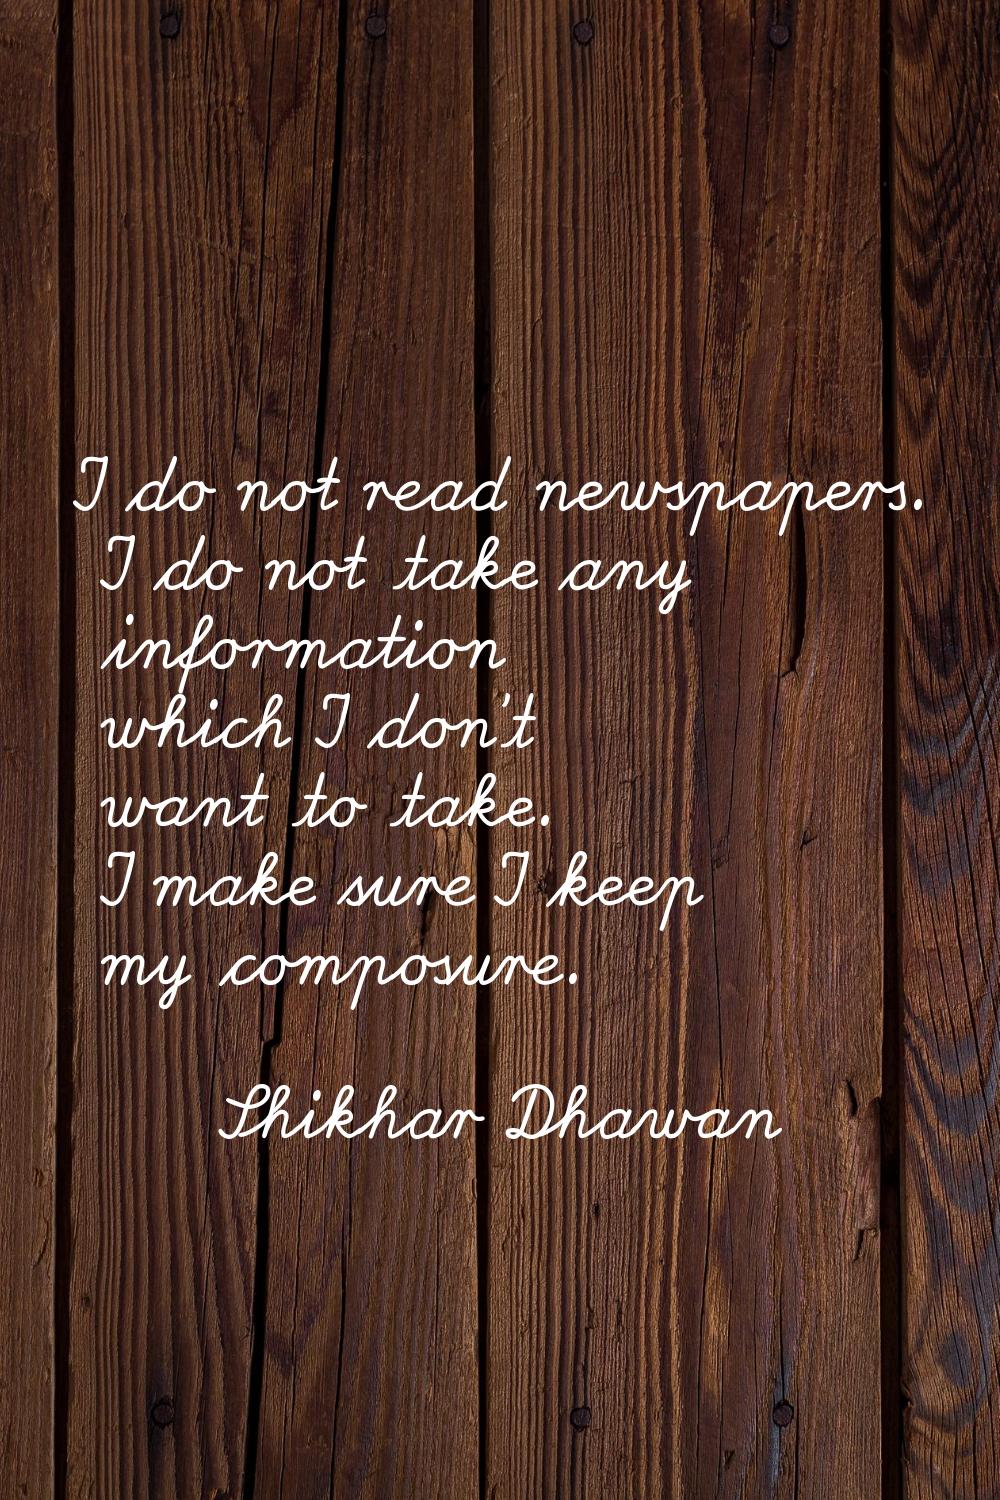 I do not read newspapers. I do not take any information which I don't want to take. I make sure I k